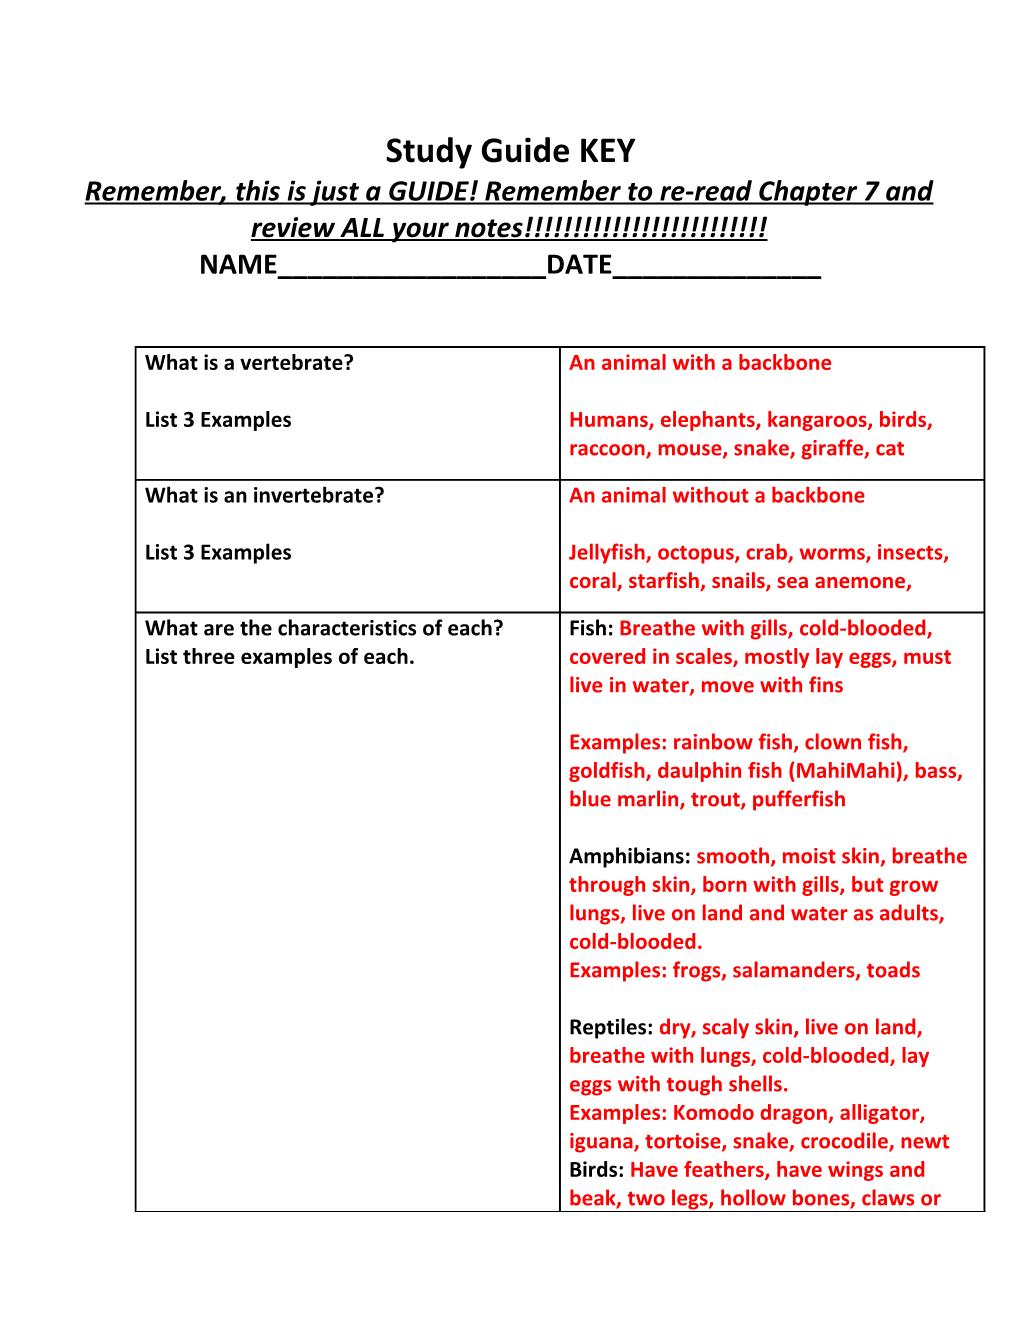 Remember, This Is Just a GUIDE! Remember to Re-Read Chapter 7 and Review ALL Your Notes